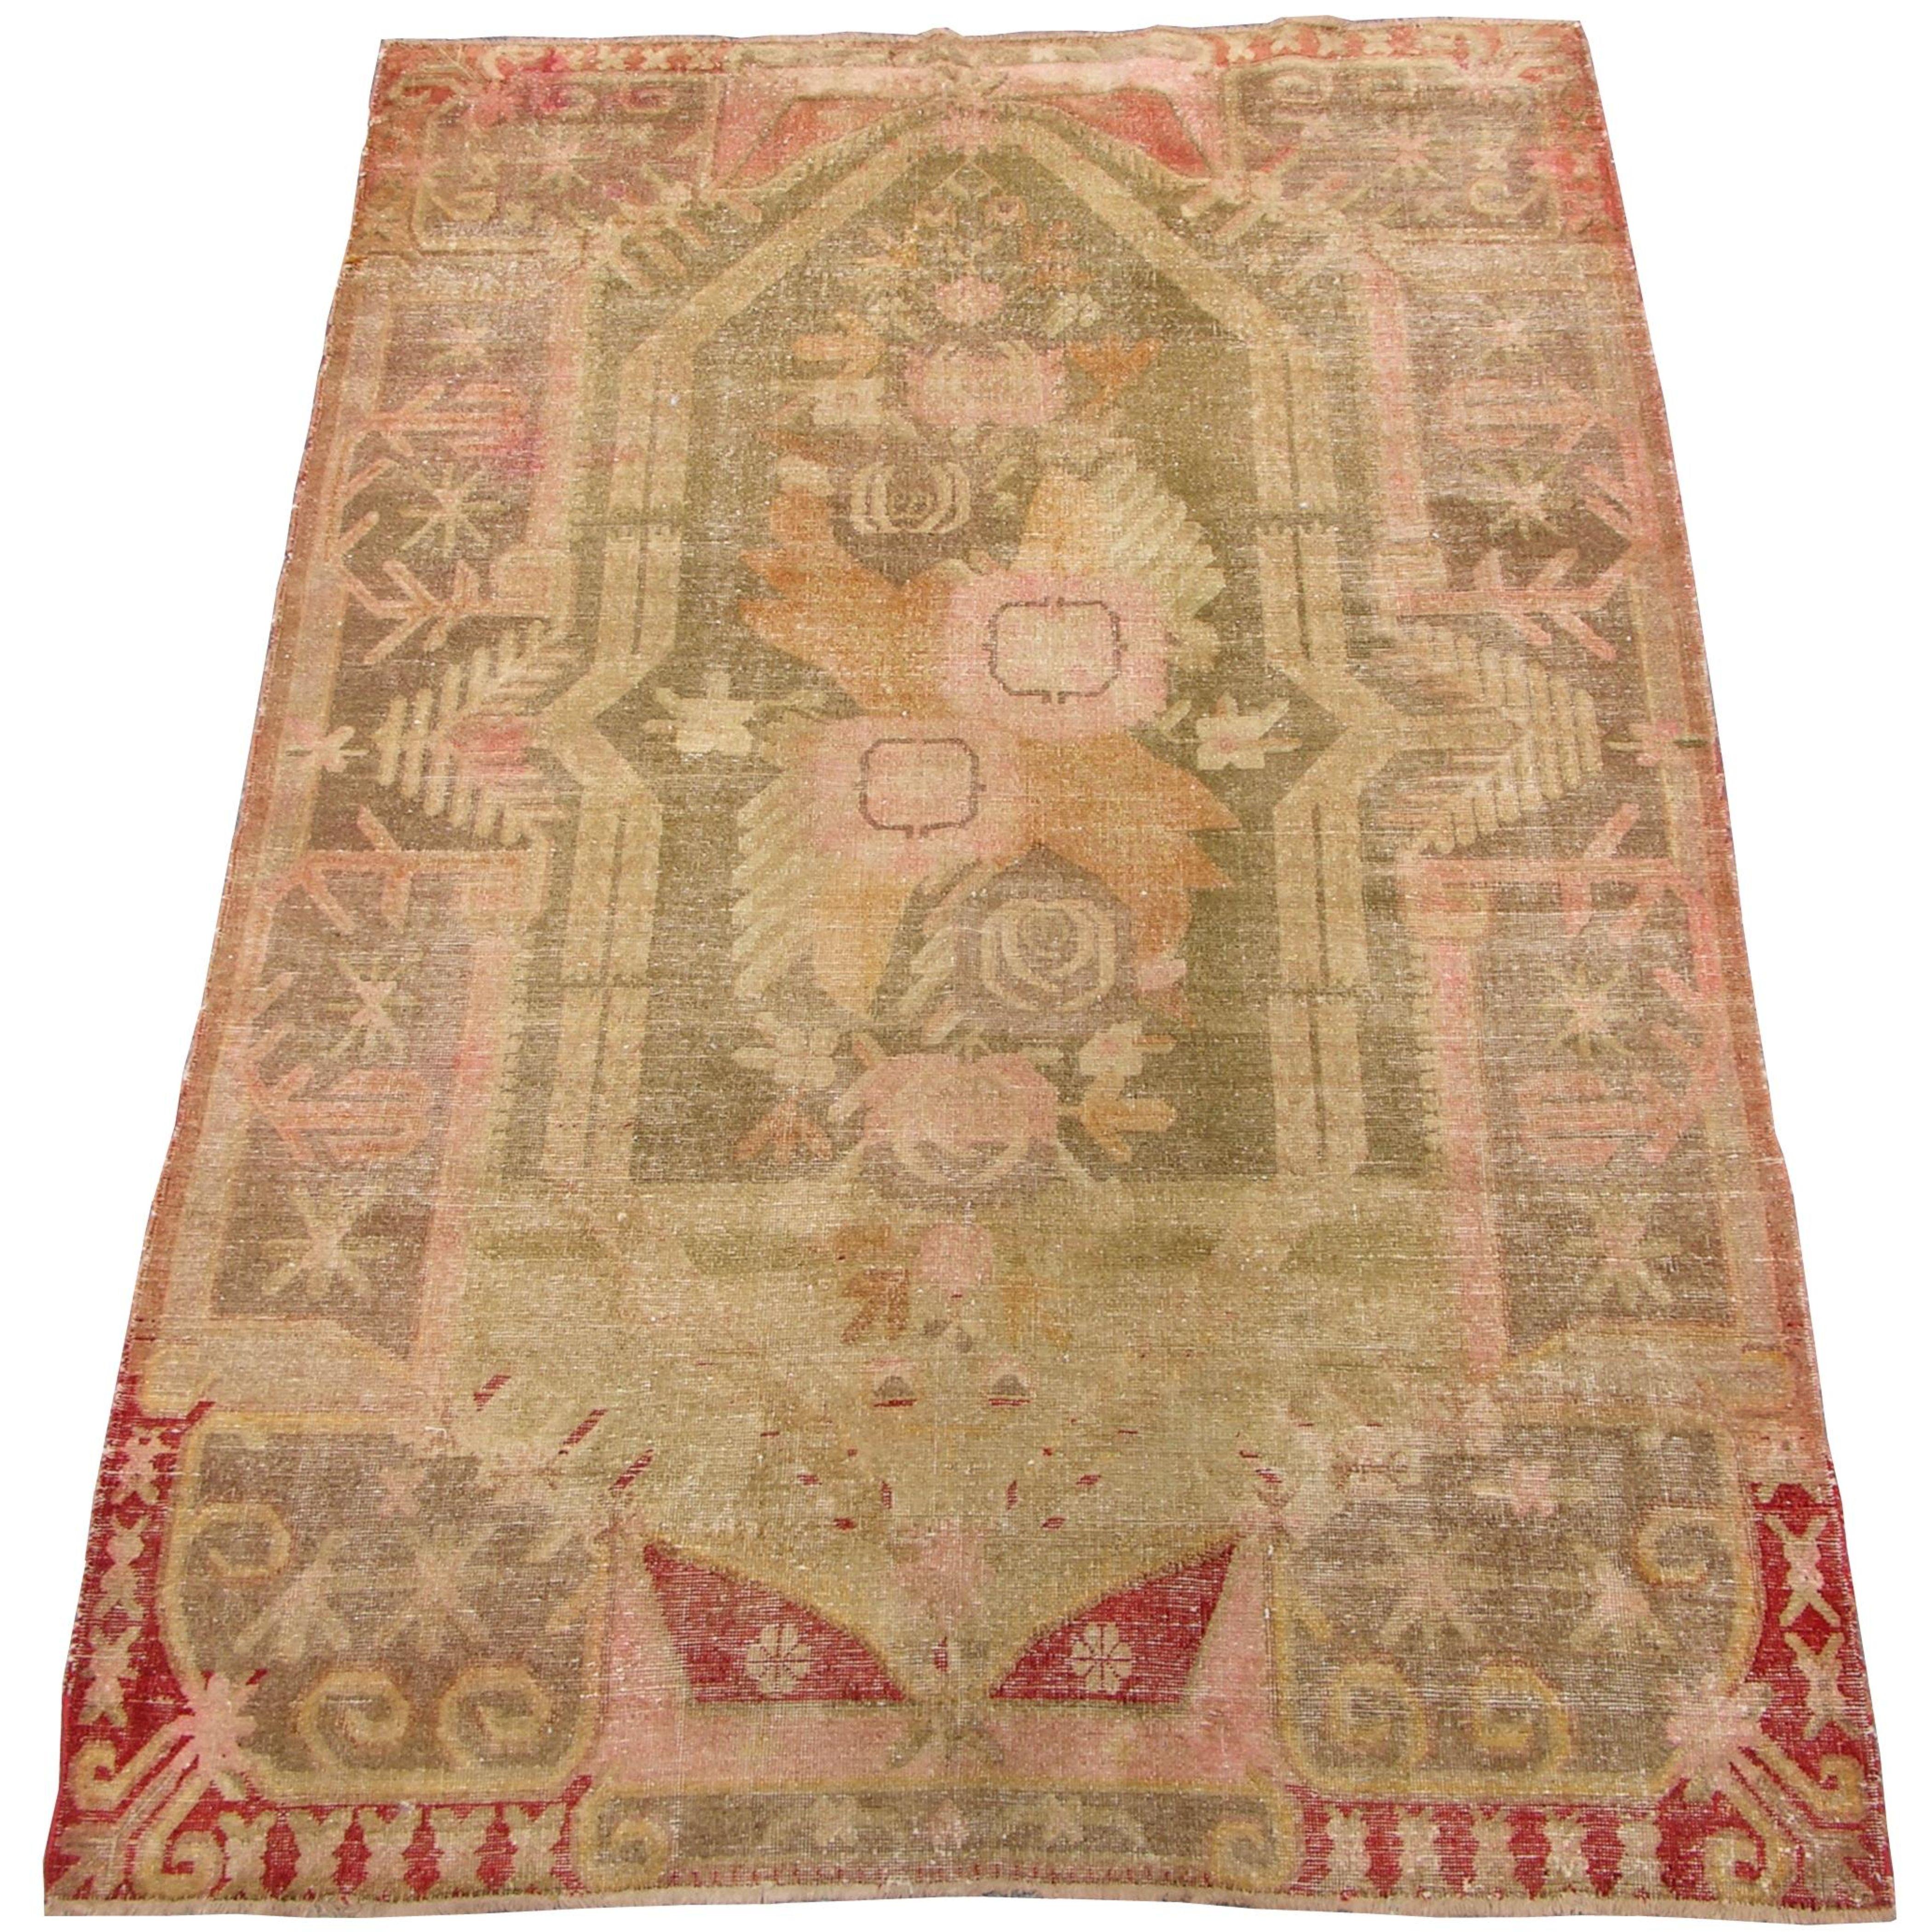 Antique 1920 Samarkand Rug In Good Condition For Sale In Los Angeles, US